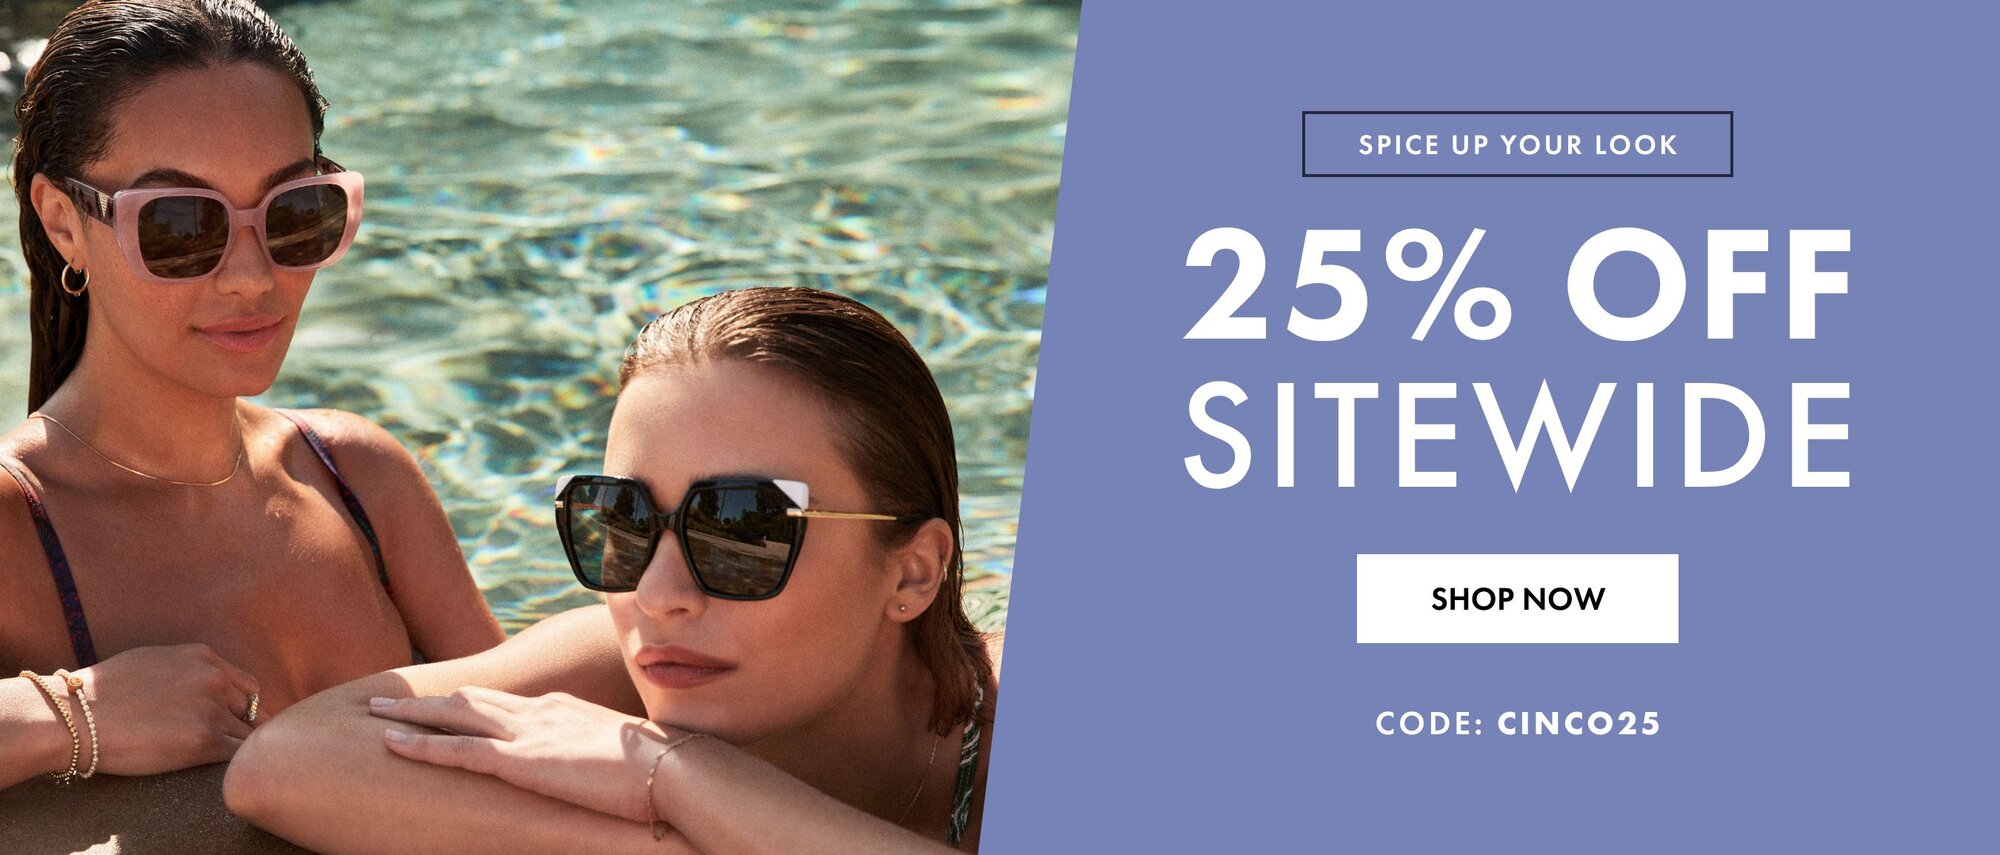 Spice Up Your Look, 25% Off Sitewide. Code: CINCO25